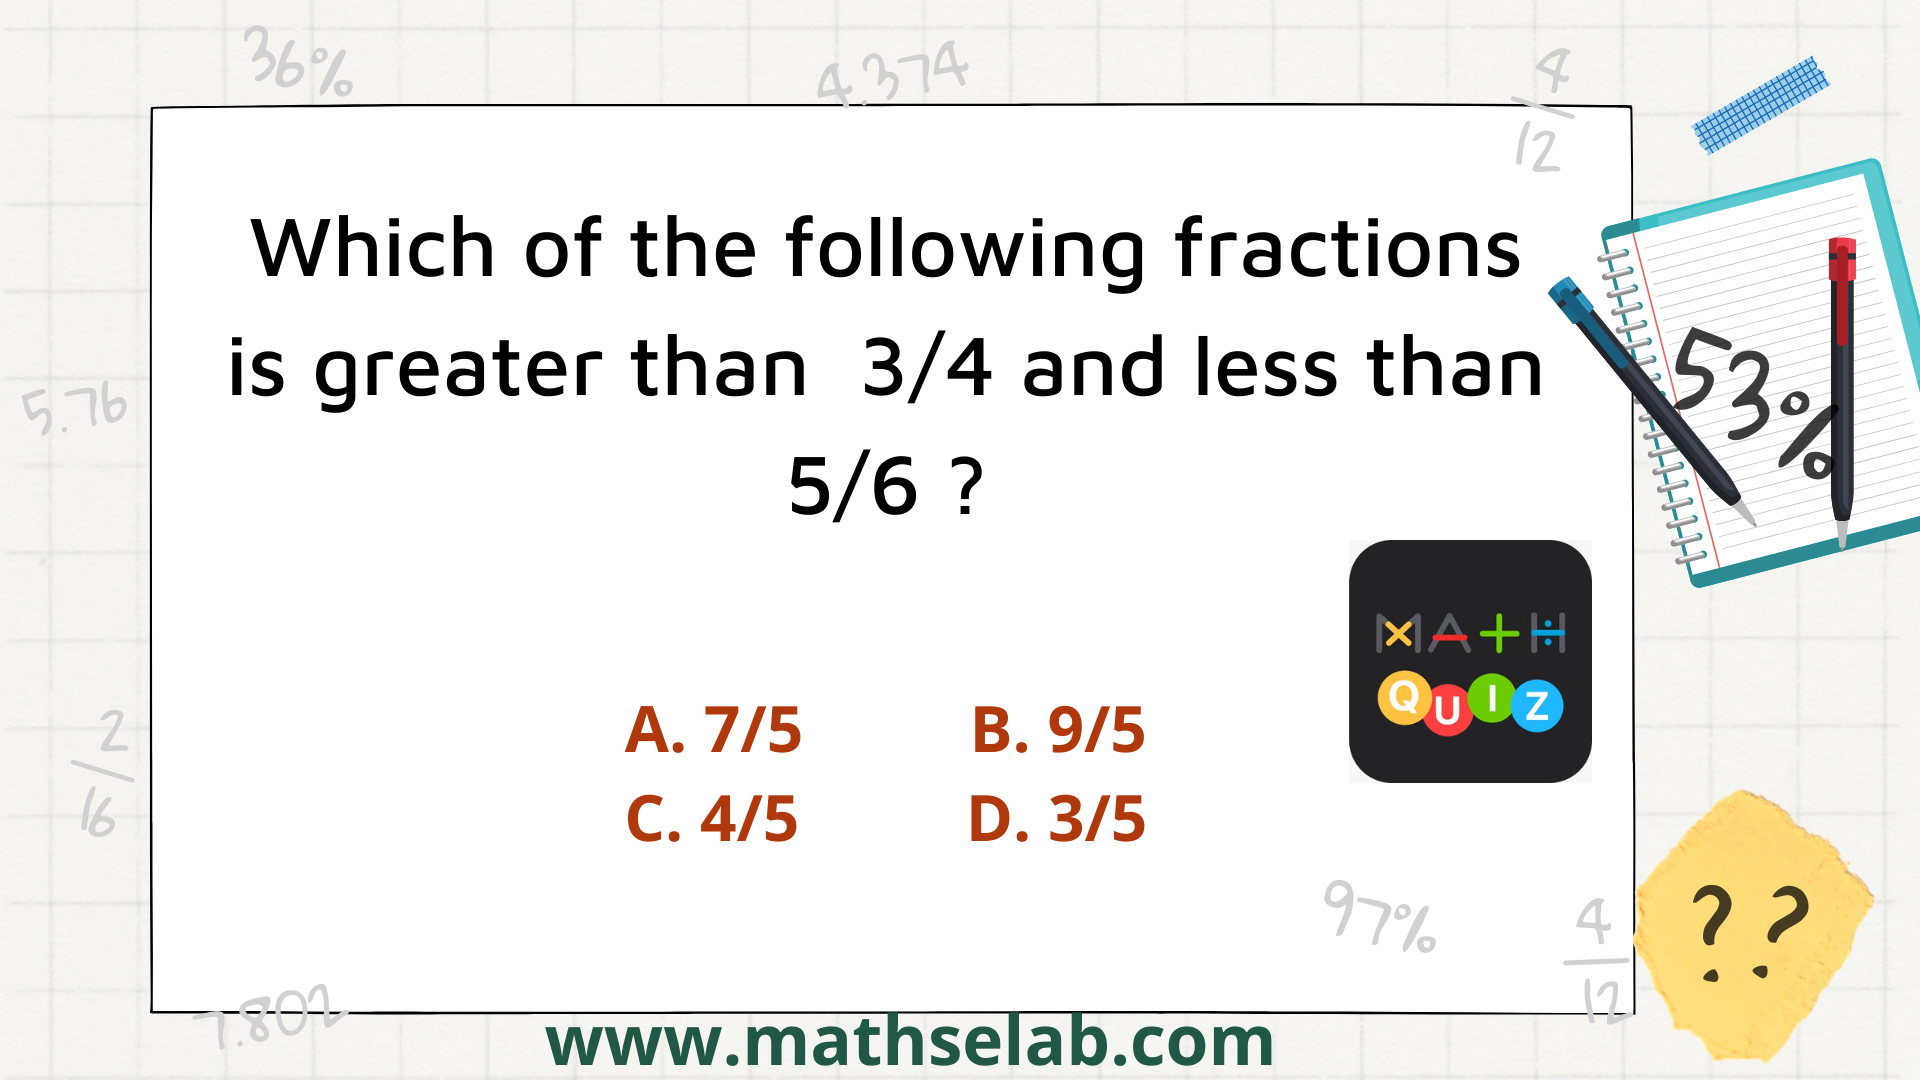 Which of the following fractions is greater than  3/4 and less than 5/6 ?